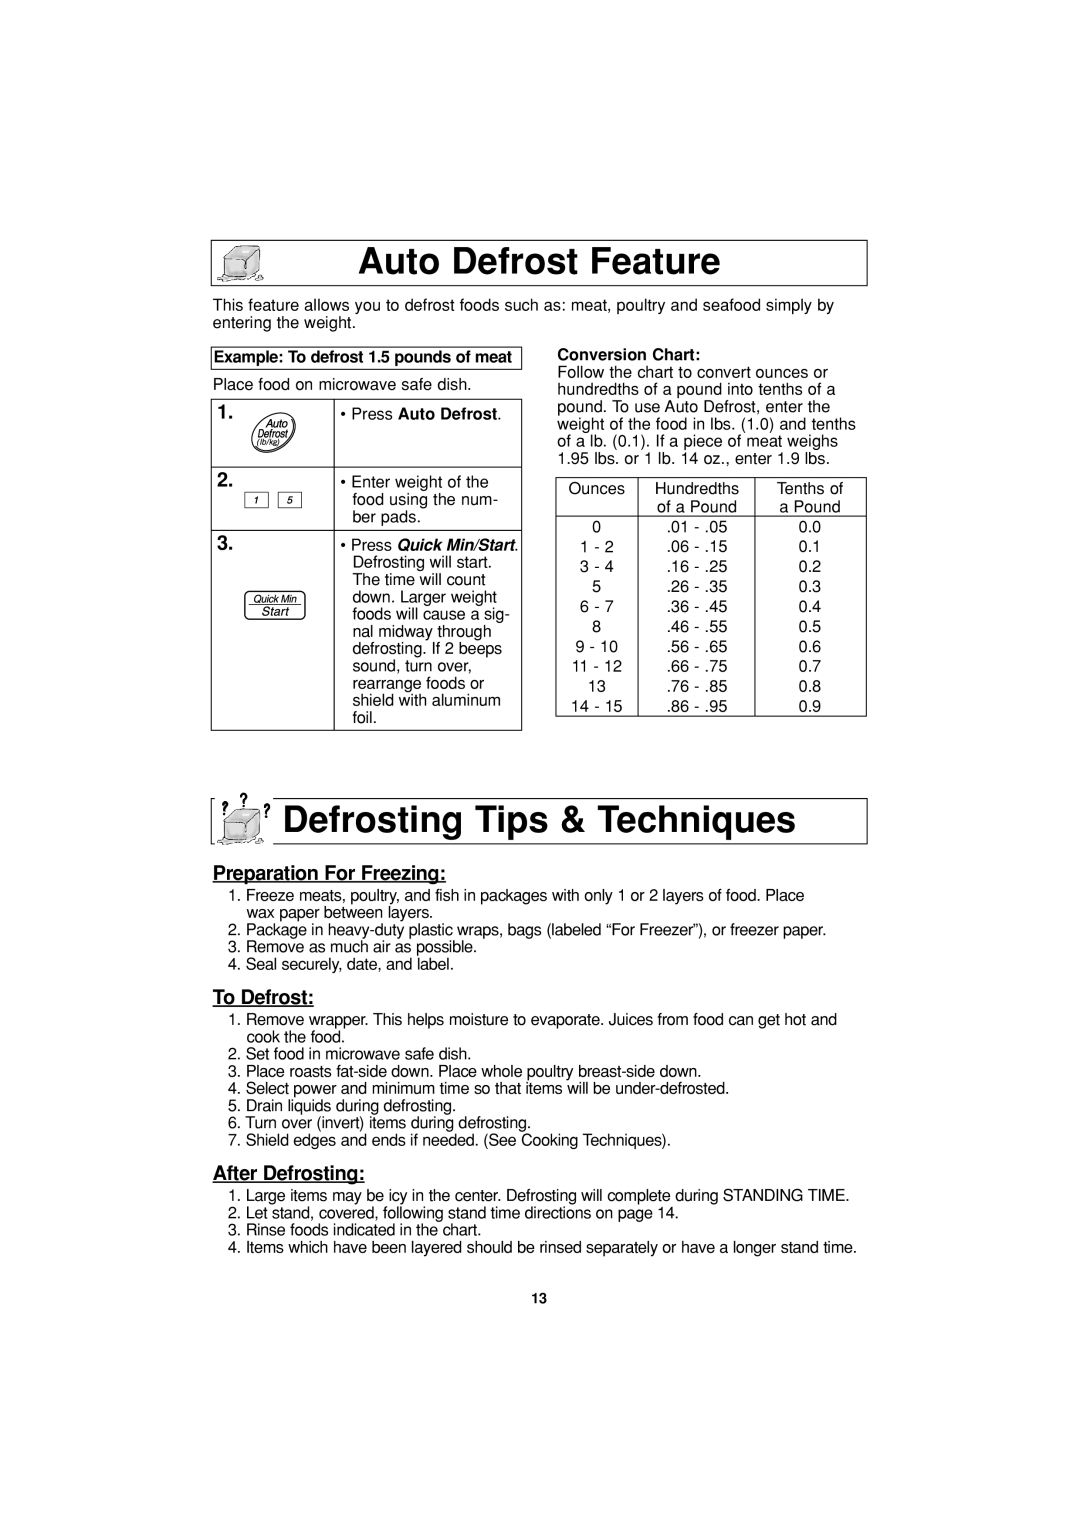 Panasonic NN-S334 Auto Defrost Feature, Defrosting Tips & Techniques, Preparation For Freezing, To Defrost 